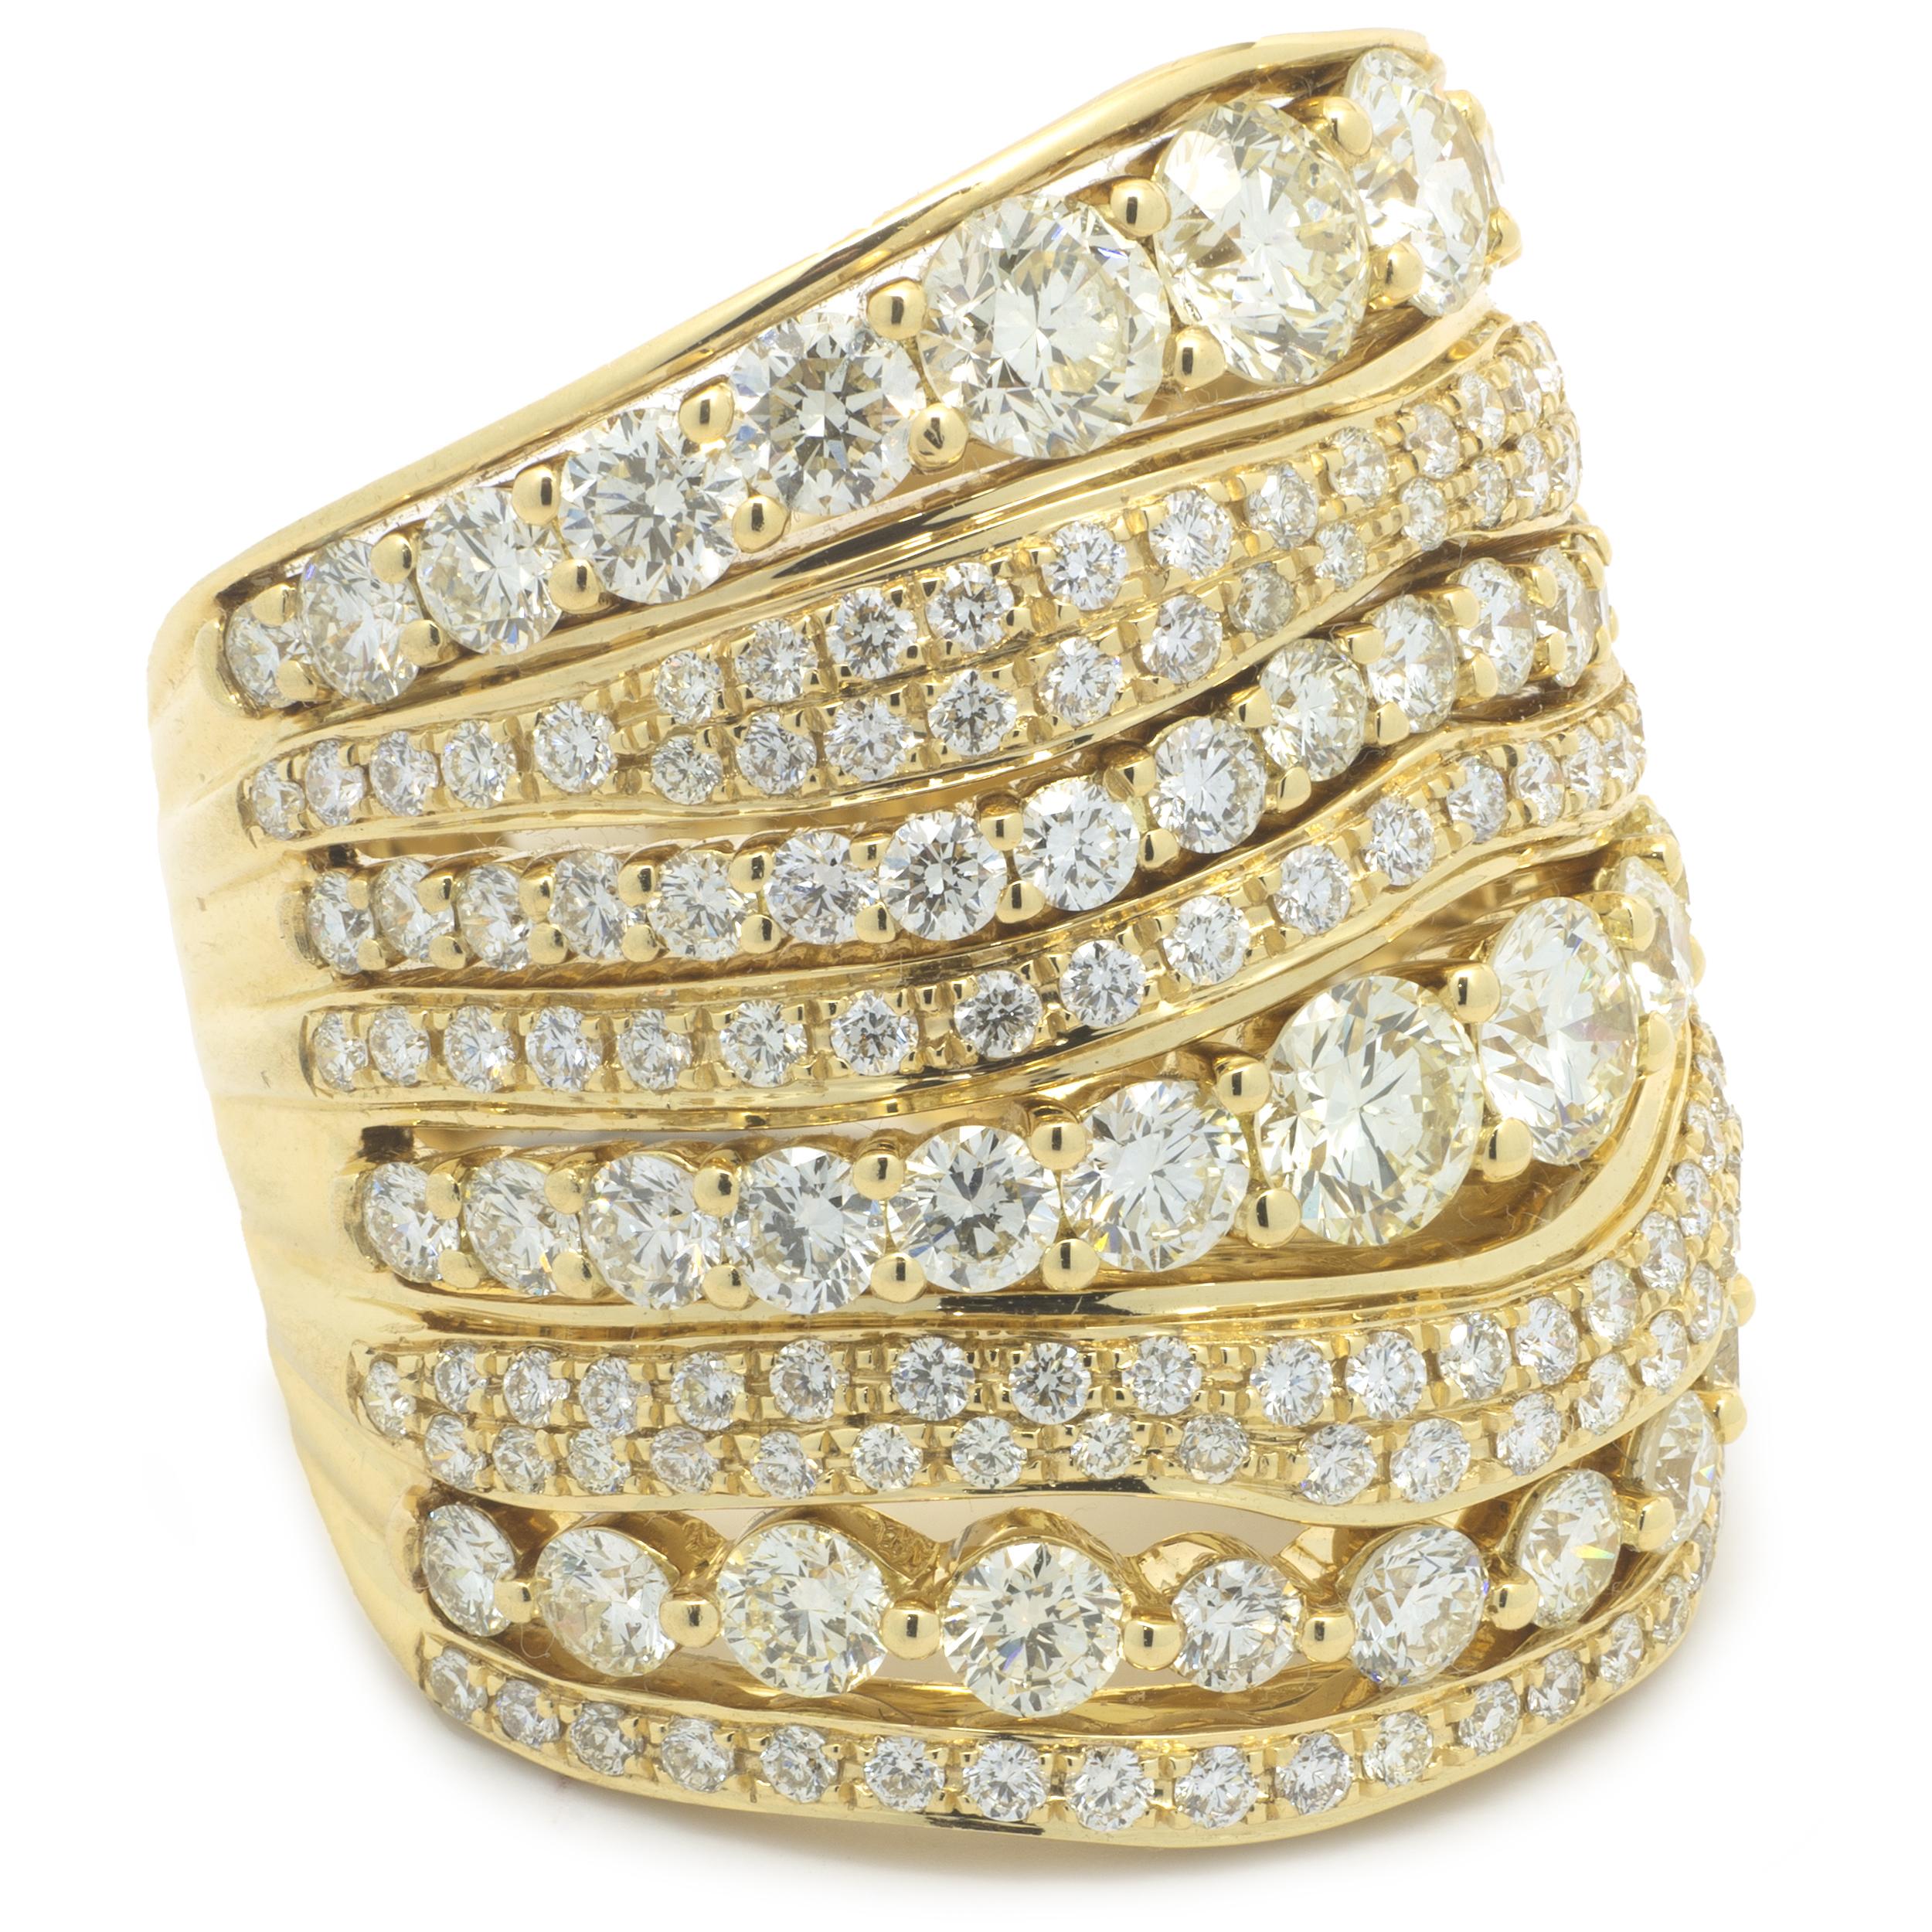 Designer: custom
Material: 18K yellow gold
Diamond:  202 round brilliant cut = 4.64cttw
Color: J
Clarity: VS2
Ring size: 7 (please allow two additional shipping days for sizing requests)
Weight:  16.93 grams
